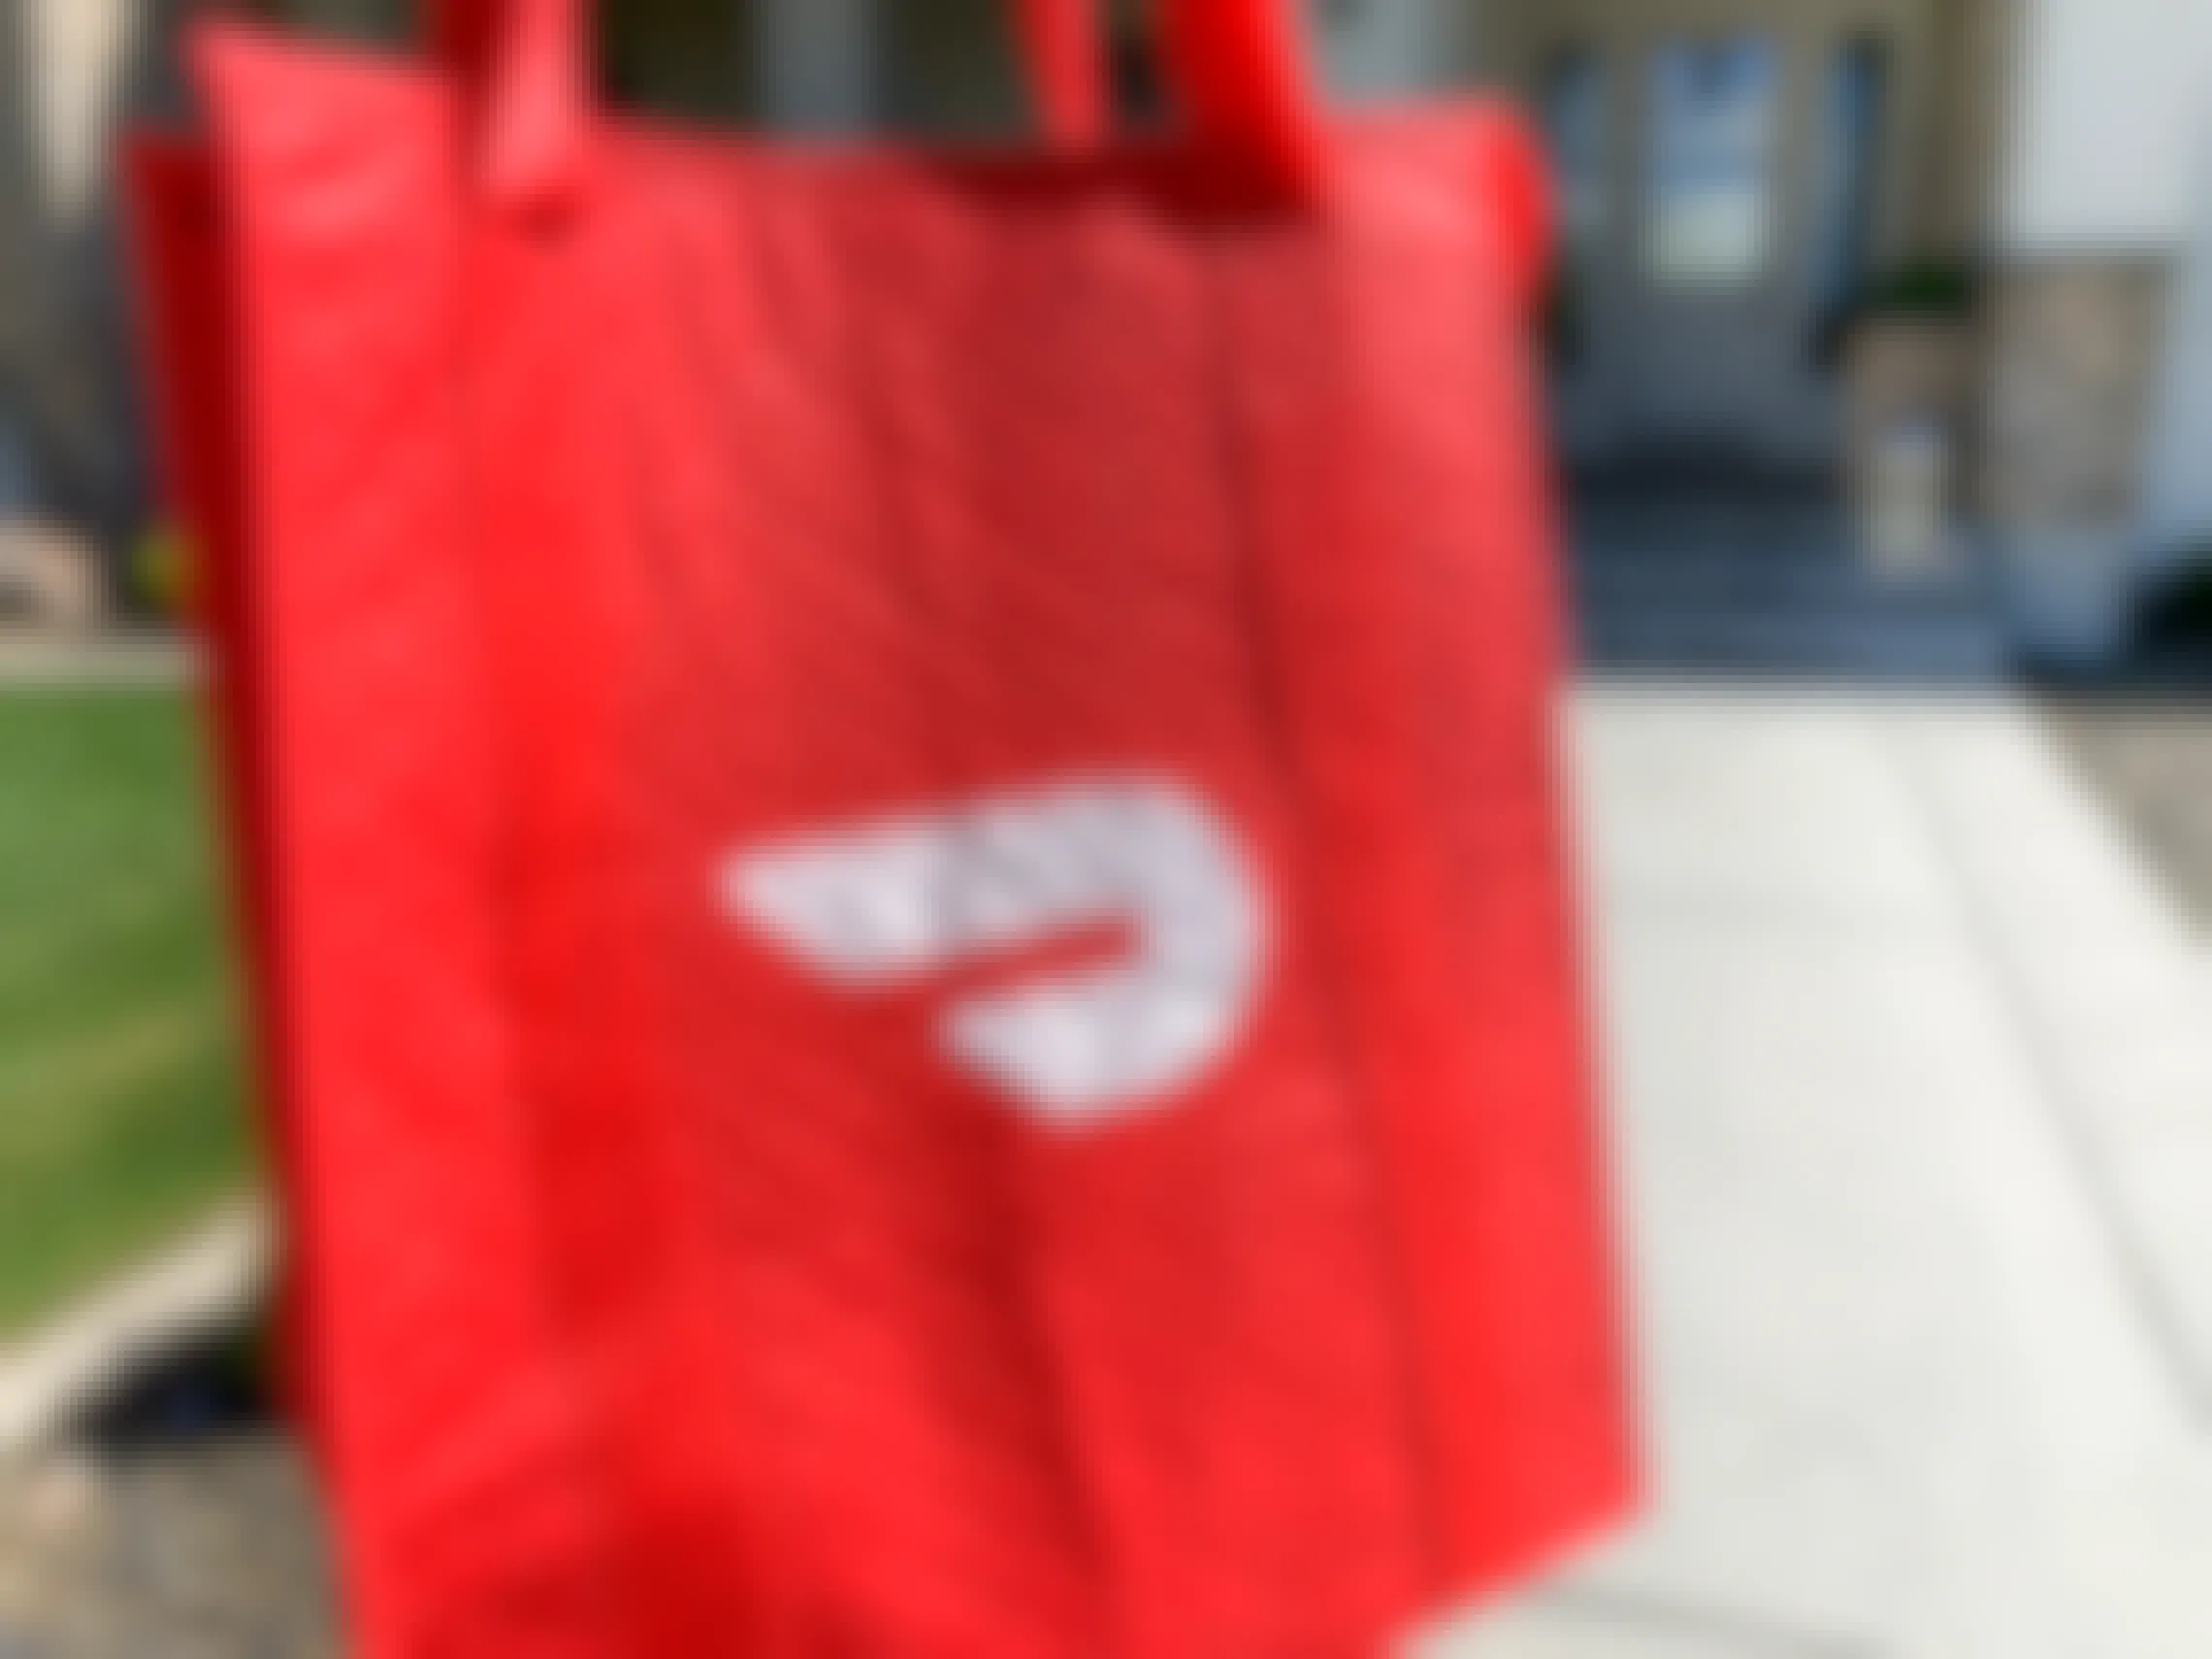 A doordash bag in front of a house.